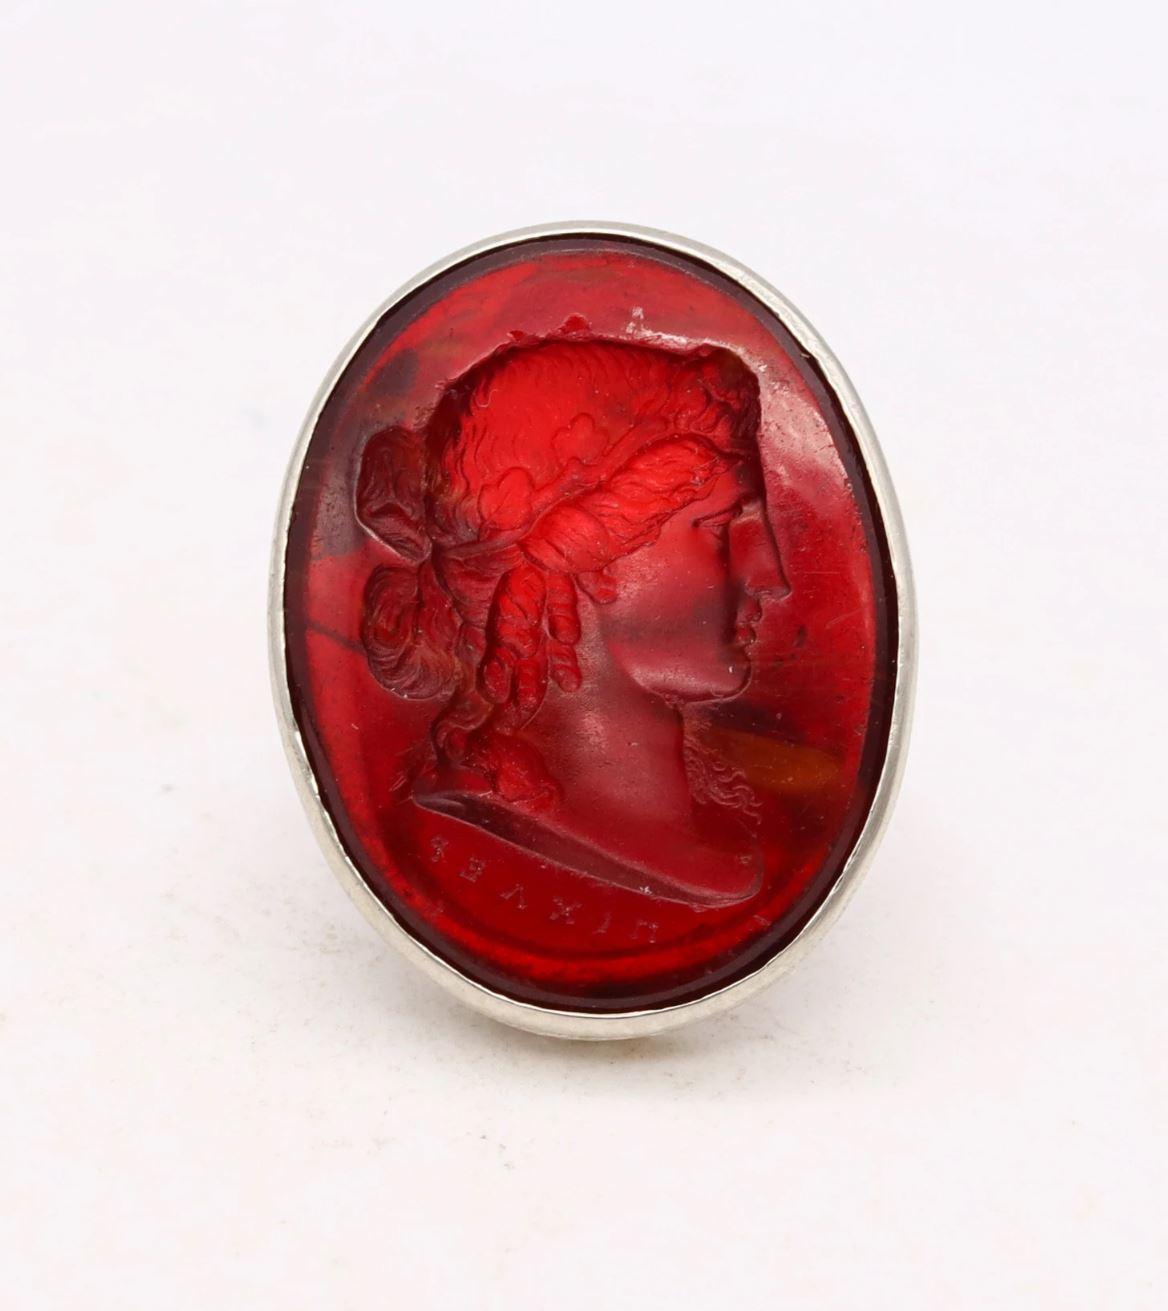 Important carved intaglio ring by Giovanni or Luigi Pichler (1773-1854).

Fabulous and extremely rare intaglio seal piece, created in Europe by the Pichler's Atelier in the late 18th century, circa 1790-1800. It was carved in an oval cabochon cut